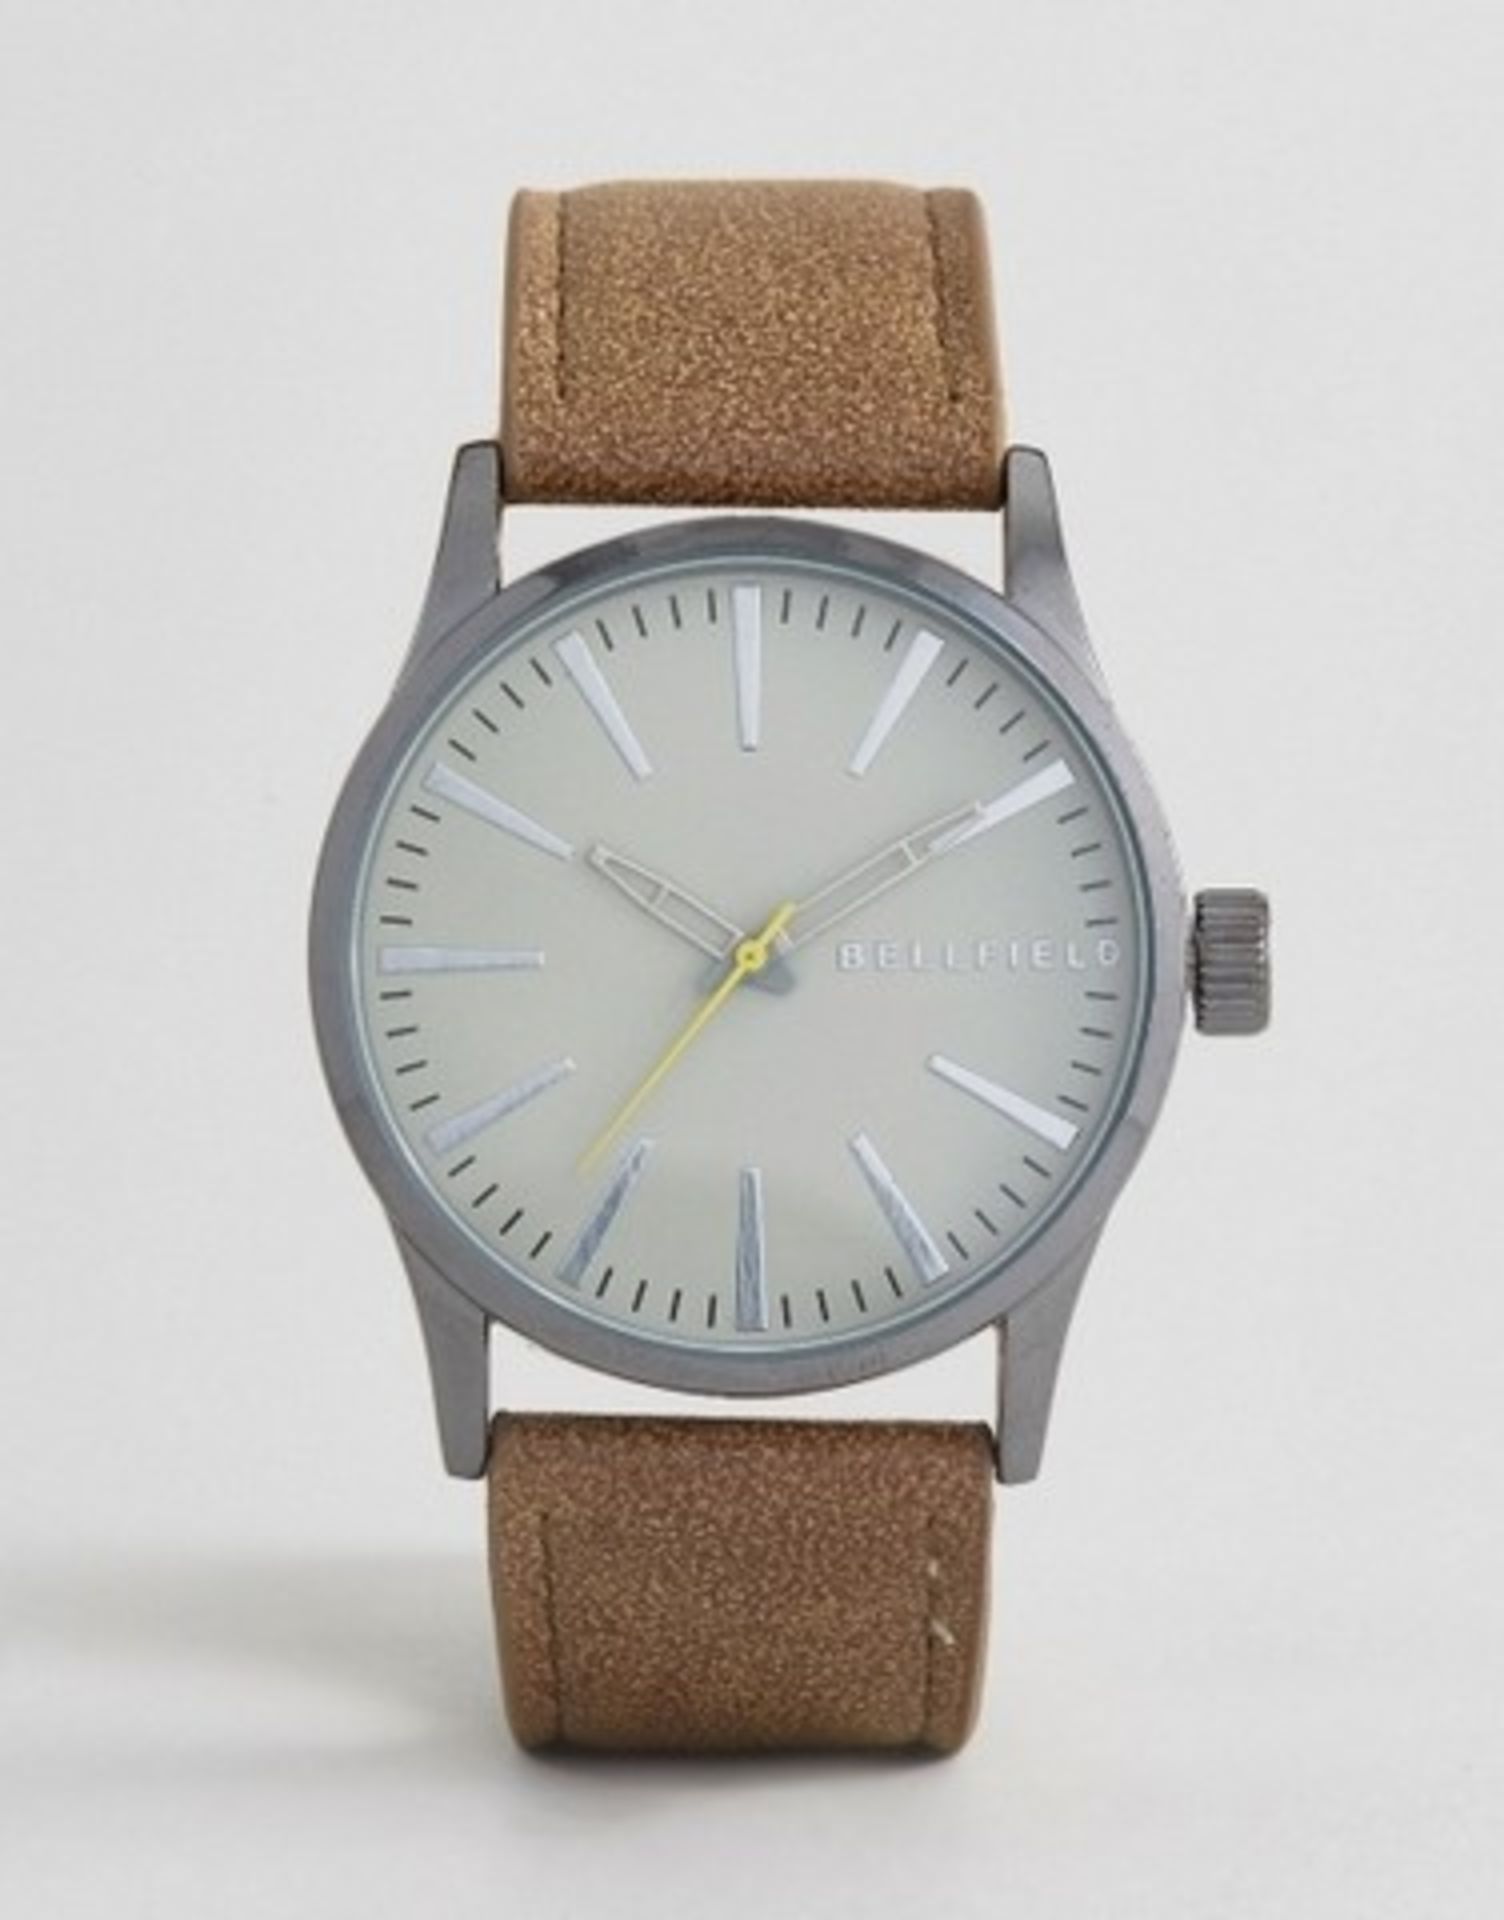 V Brand New Bellfield Gents Watch With Cream Face And Brown Leather Strap RRP £50.00